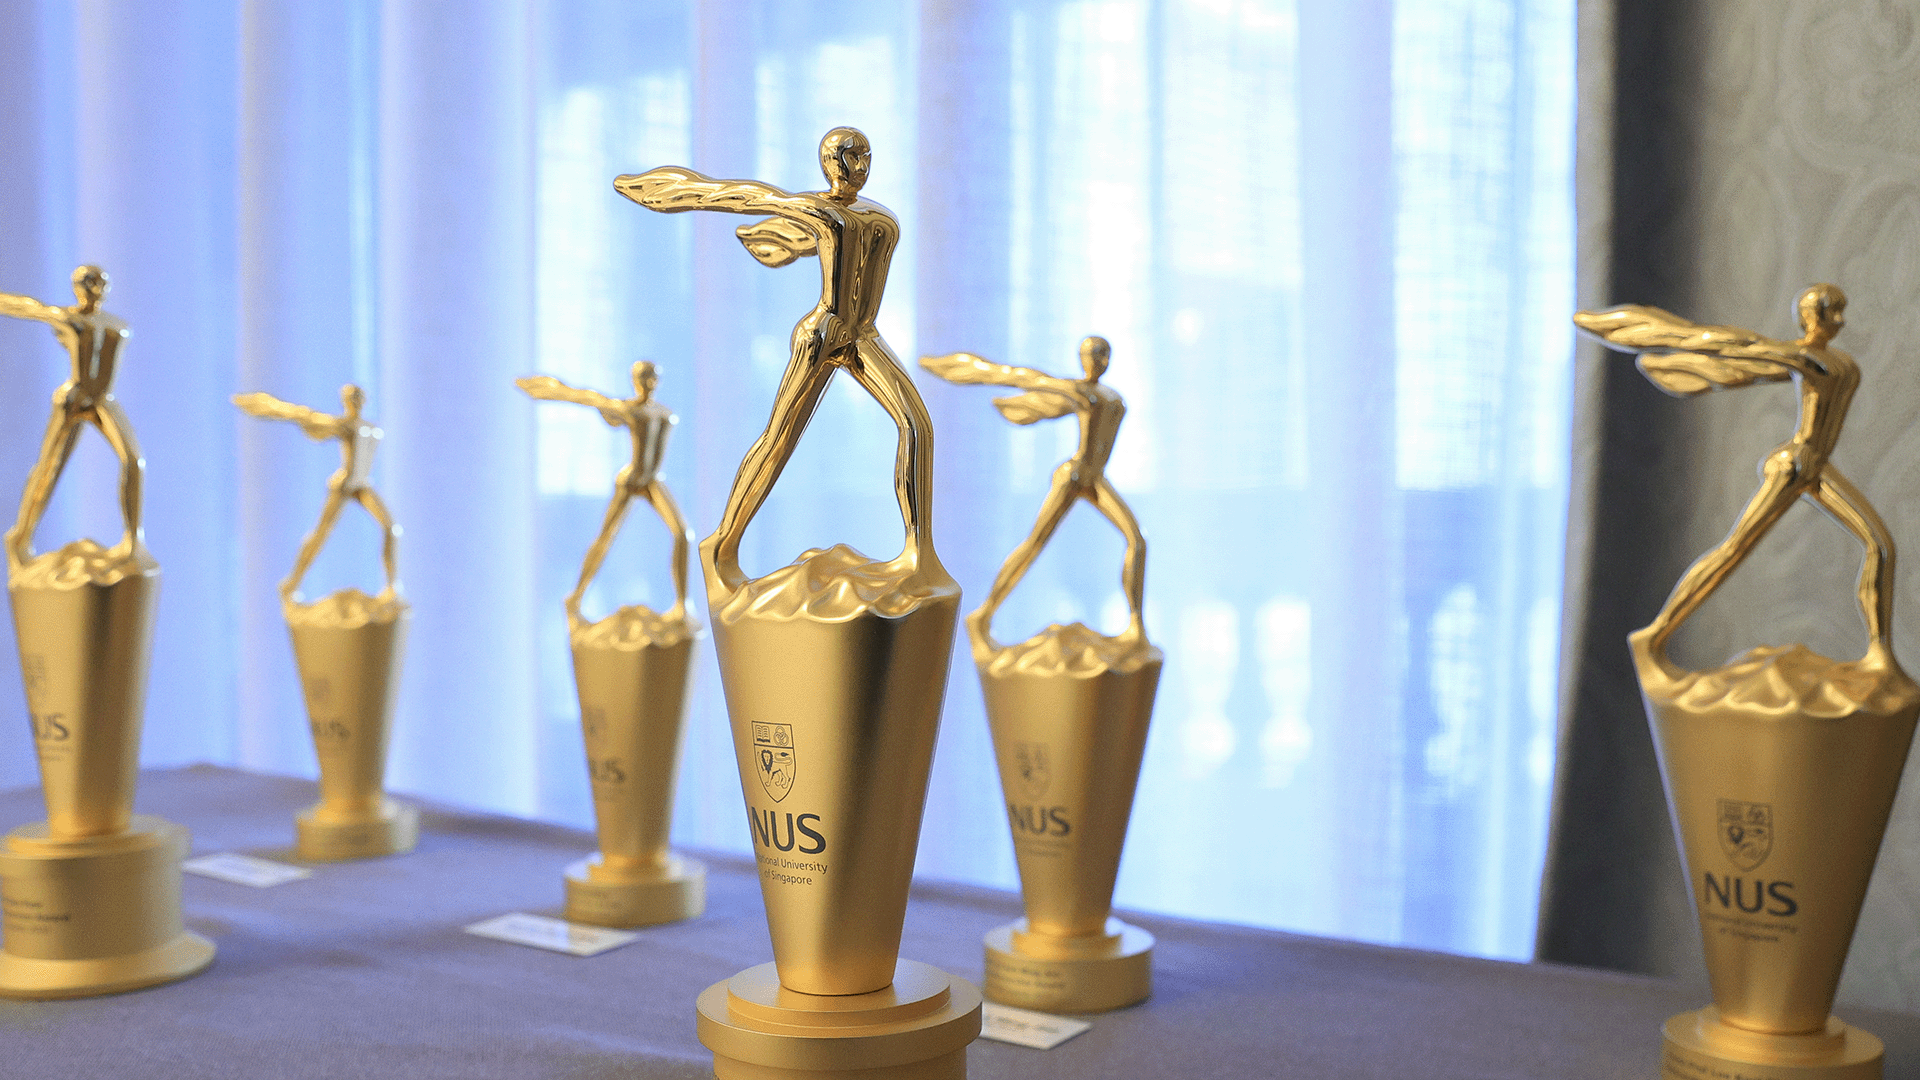 The annual awards recognise members of the NUS community who have dedicated themselves to excellence in the areas of education, research and service to the University, Singapore and the global community.